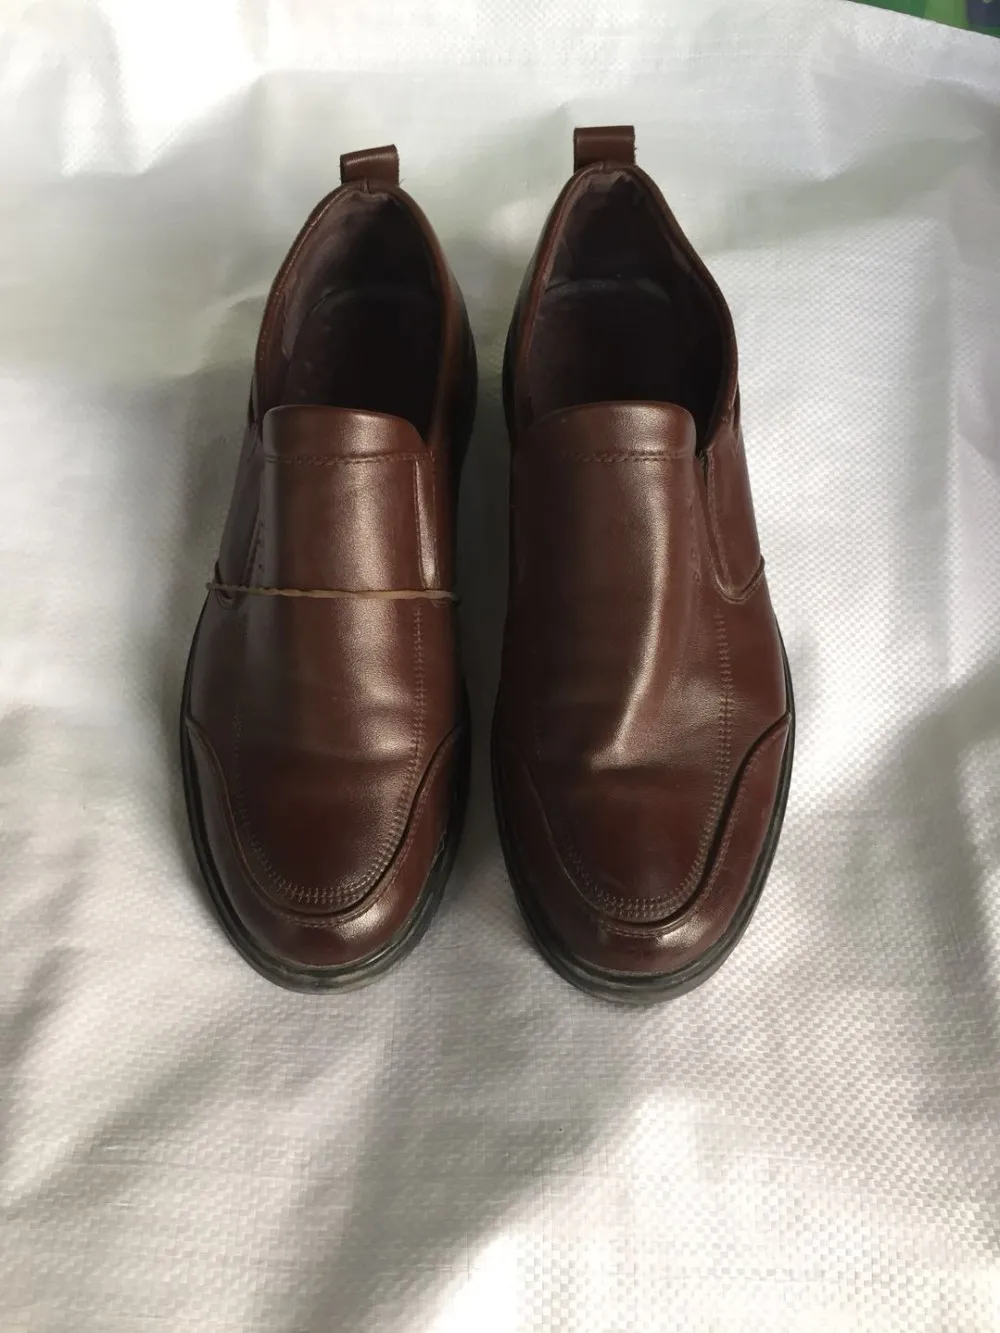 Used Men Shoes Wholesale From Usa - Buy Used Shoes,Used Men Shoes,Used ...